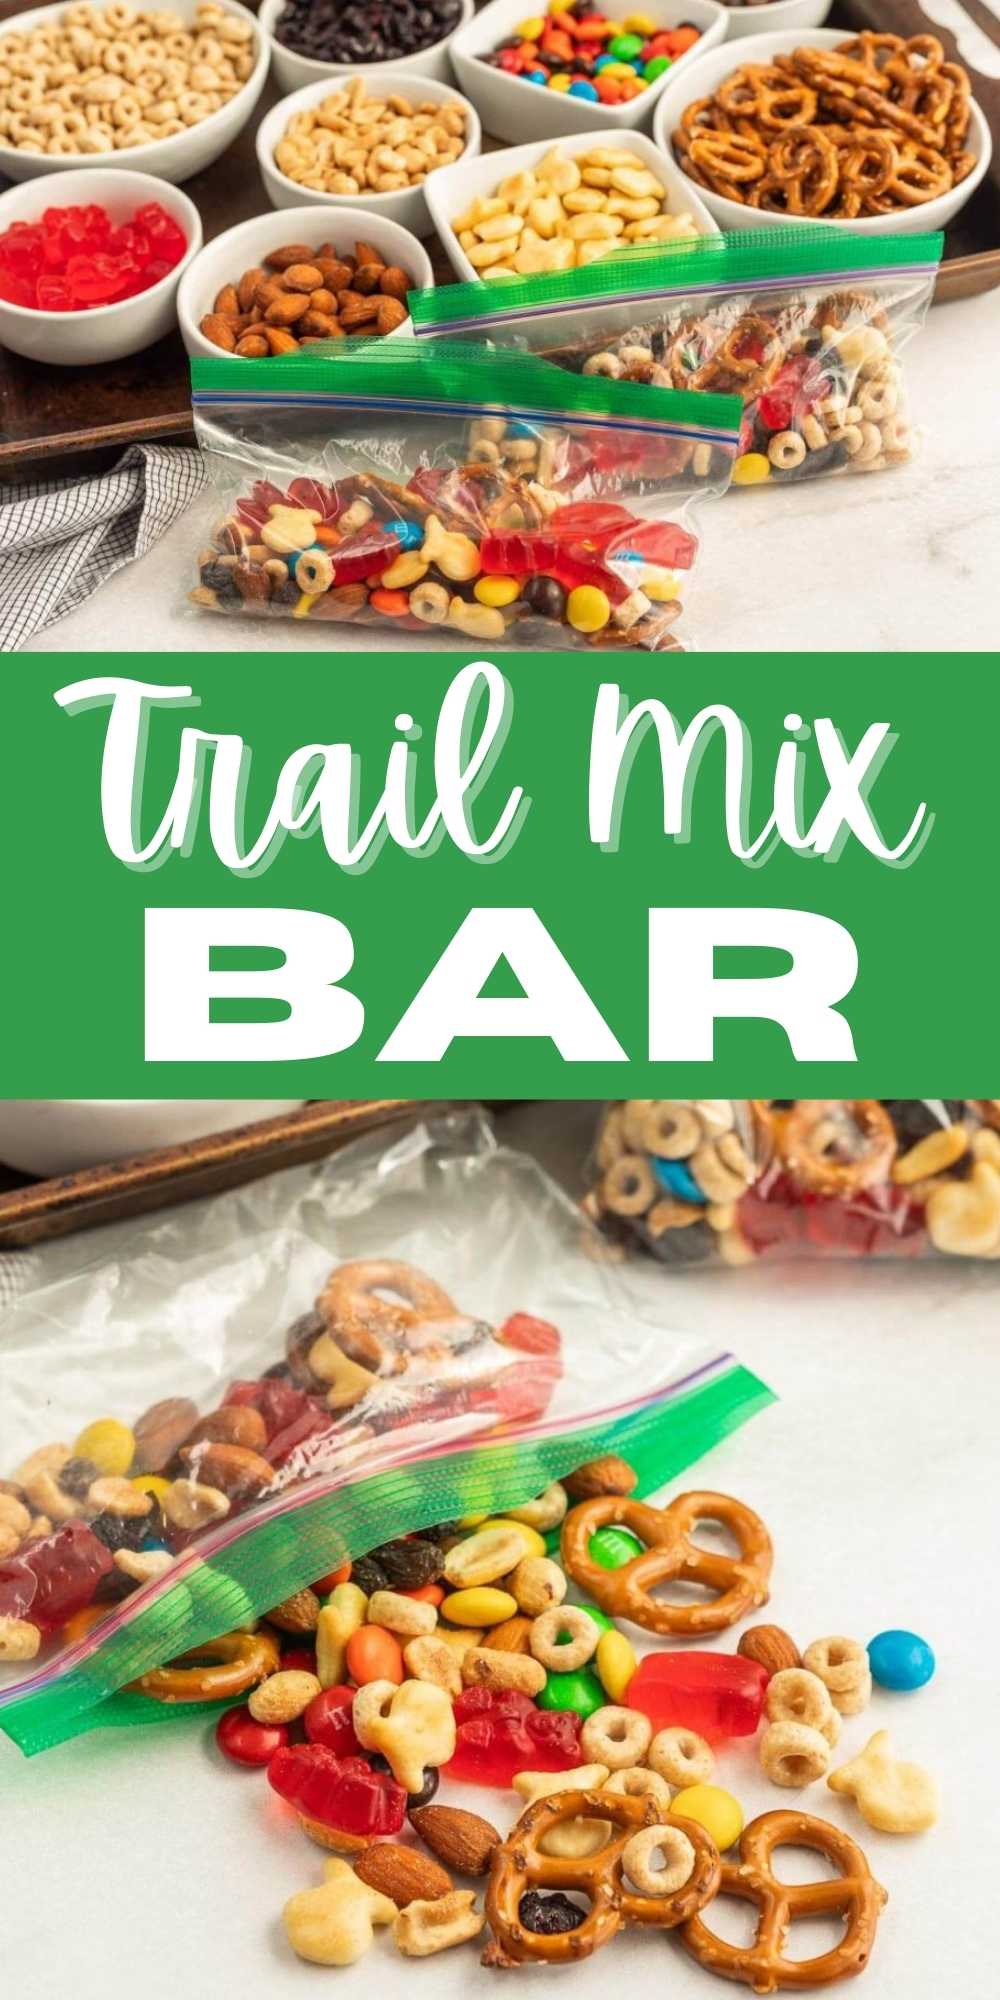 Making a Trail Mix Bar is a fun way to get the kids involved and let them assemble their trail mix snack. Fun and easy to make trail mix treat. We love making trail mix bars to allow the kids to make their own perfect snack. The great thing about having a trail mix bar is the kids can make their own snack with items they like. #eatingonadime #trailmixbar #trailmix #trailmixsnack